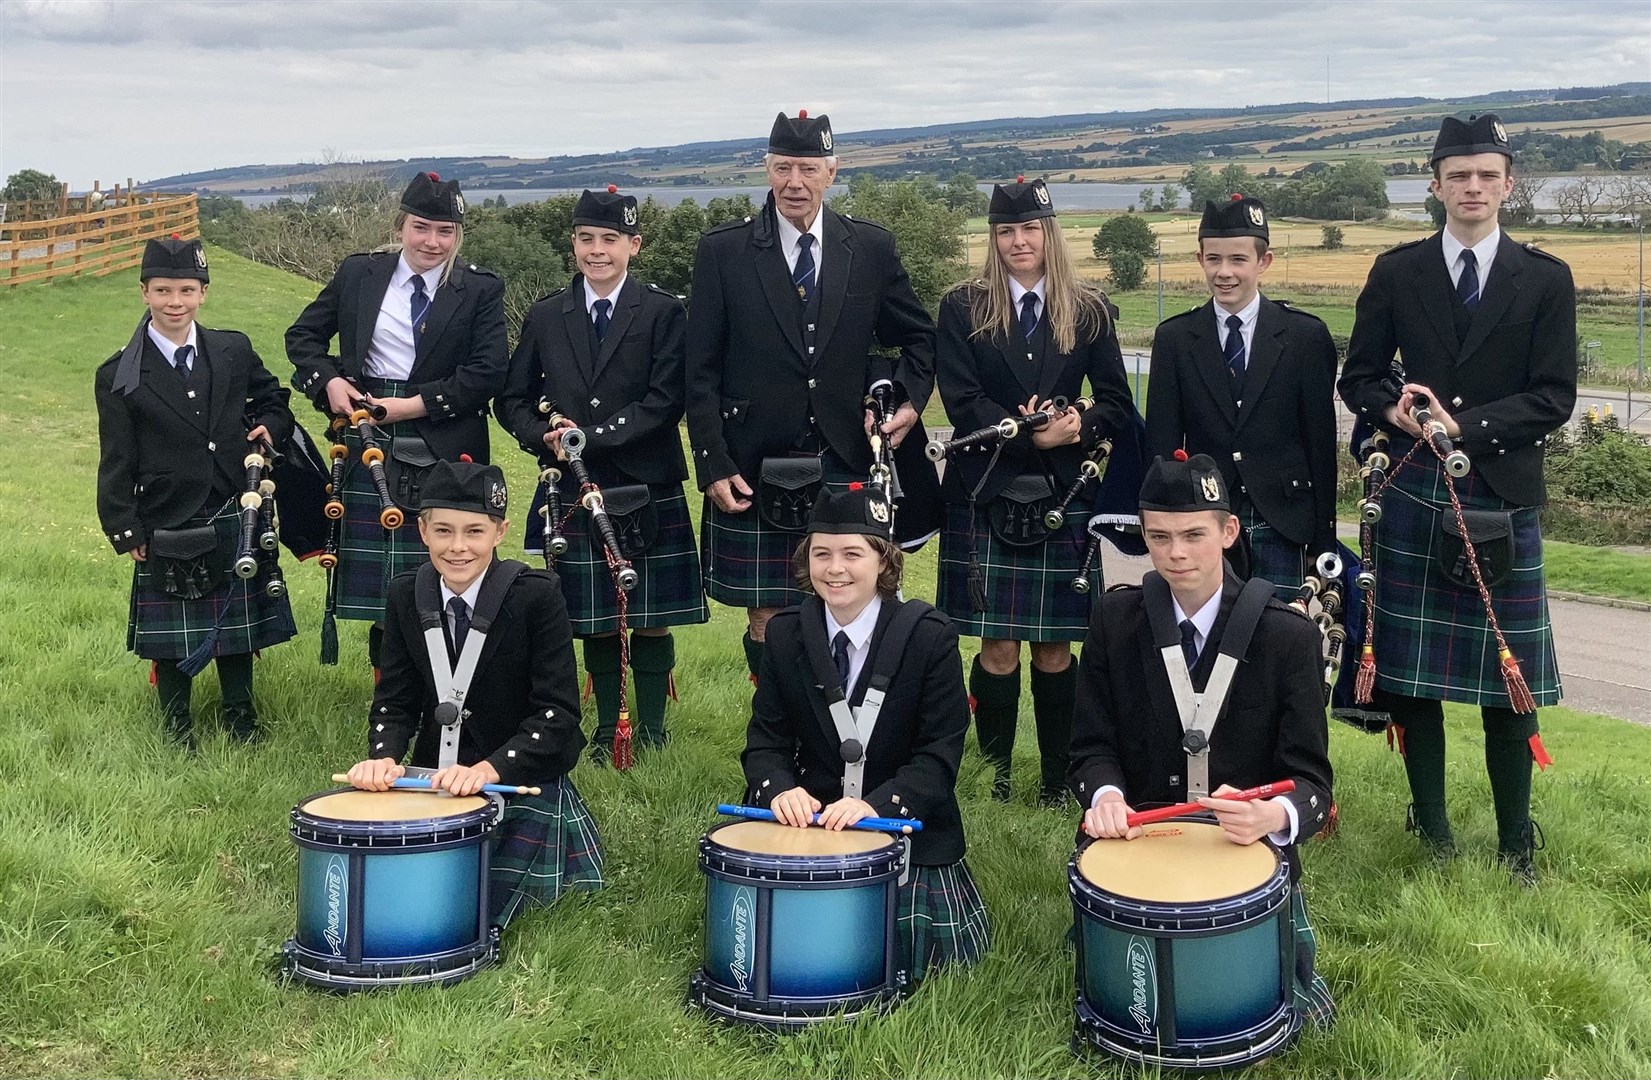 Dingwall RBL Pipe Band after playing recently at Dingwall Mart.